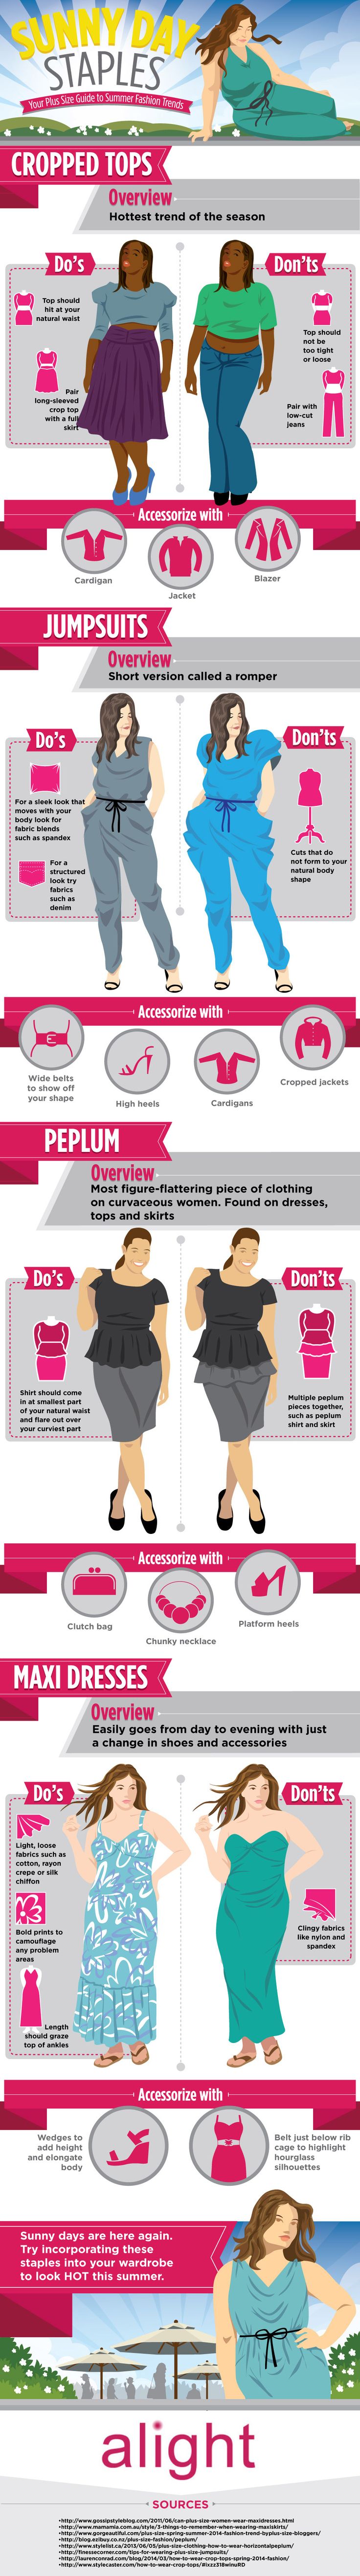 Plus Size Guide to Summer Fashion Trends